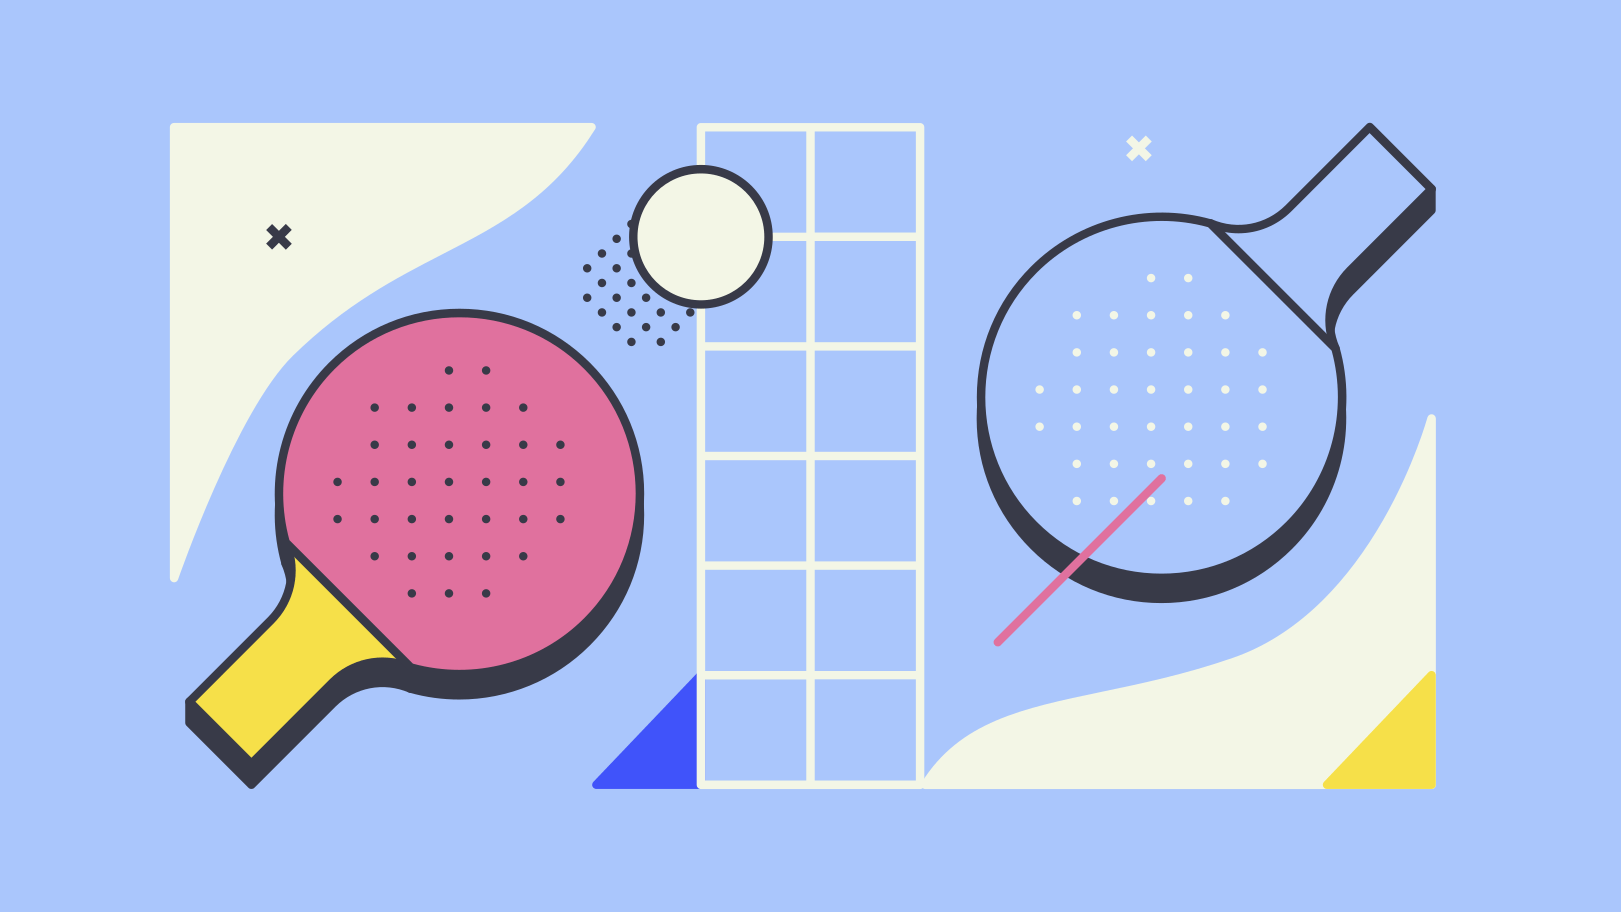 An Illustration of sport | from https://icons8.com/illustrations